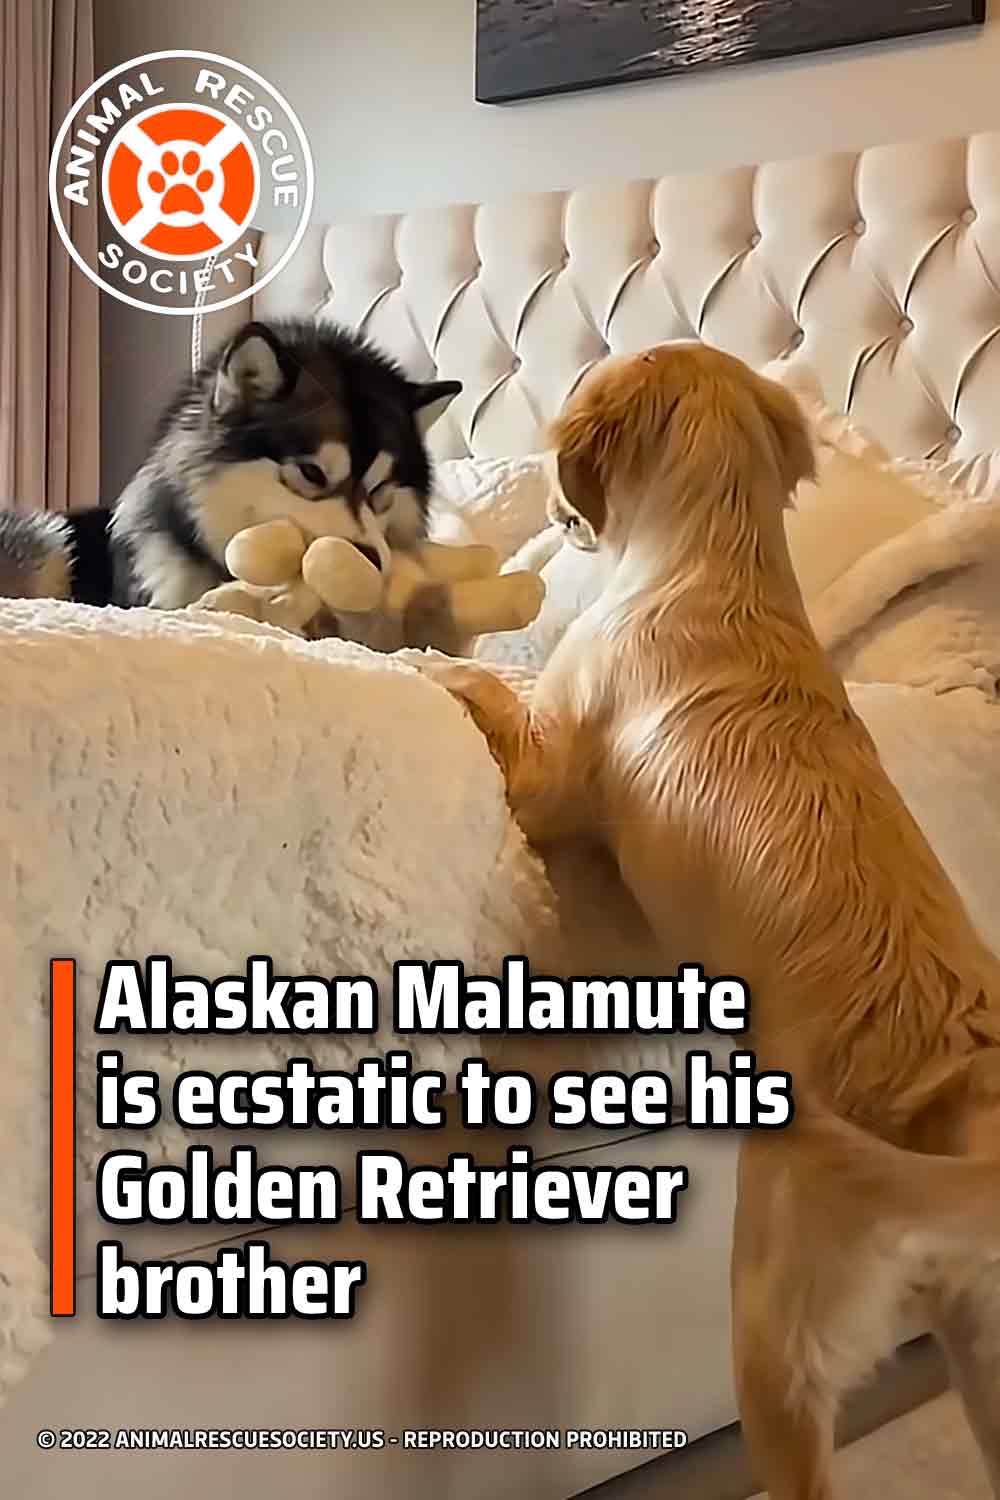 Alaskan Malamute is ecstatic to see his Golden Retriever brother